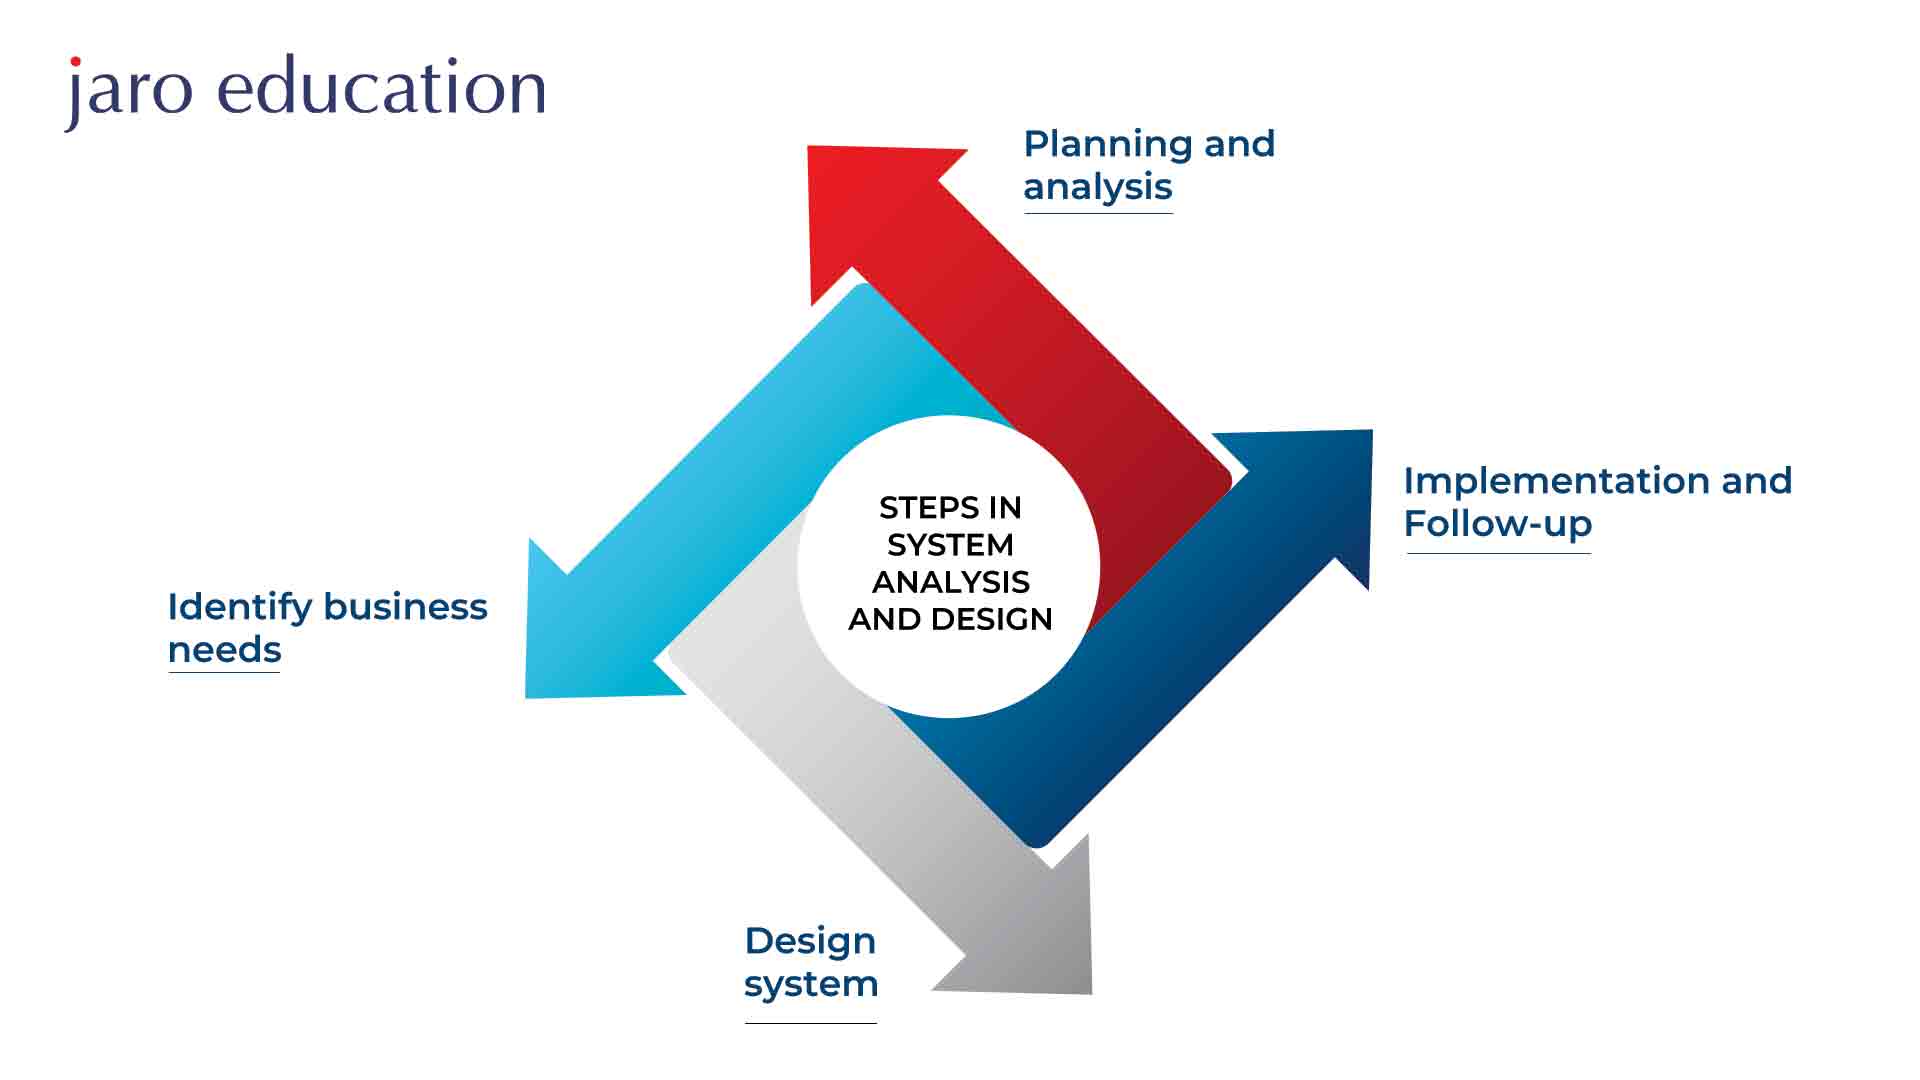 Steps in System Analysis & Design